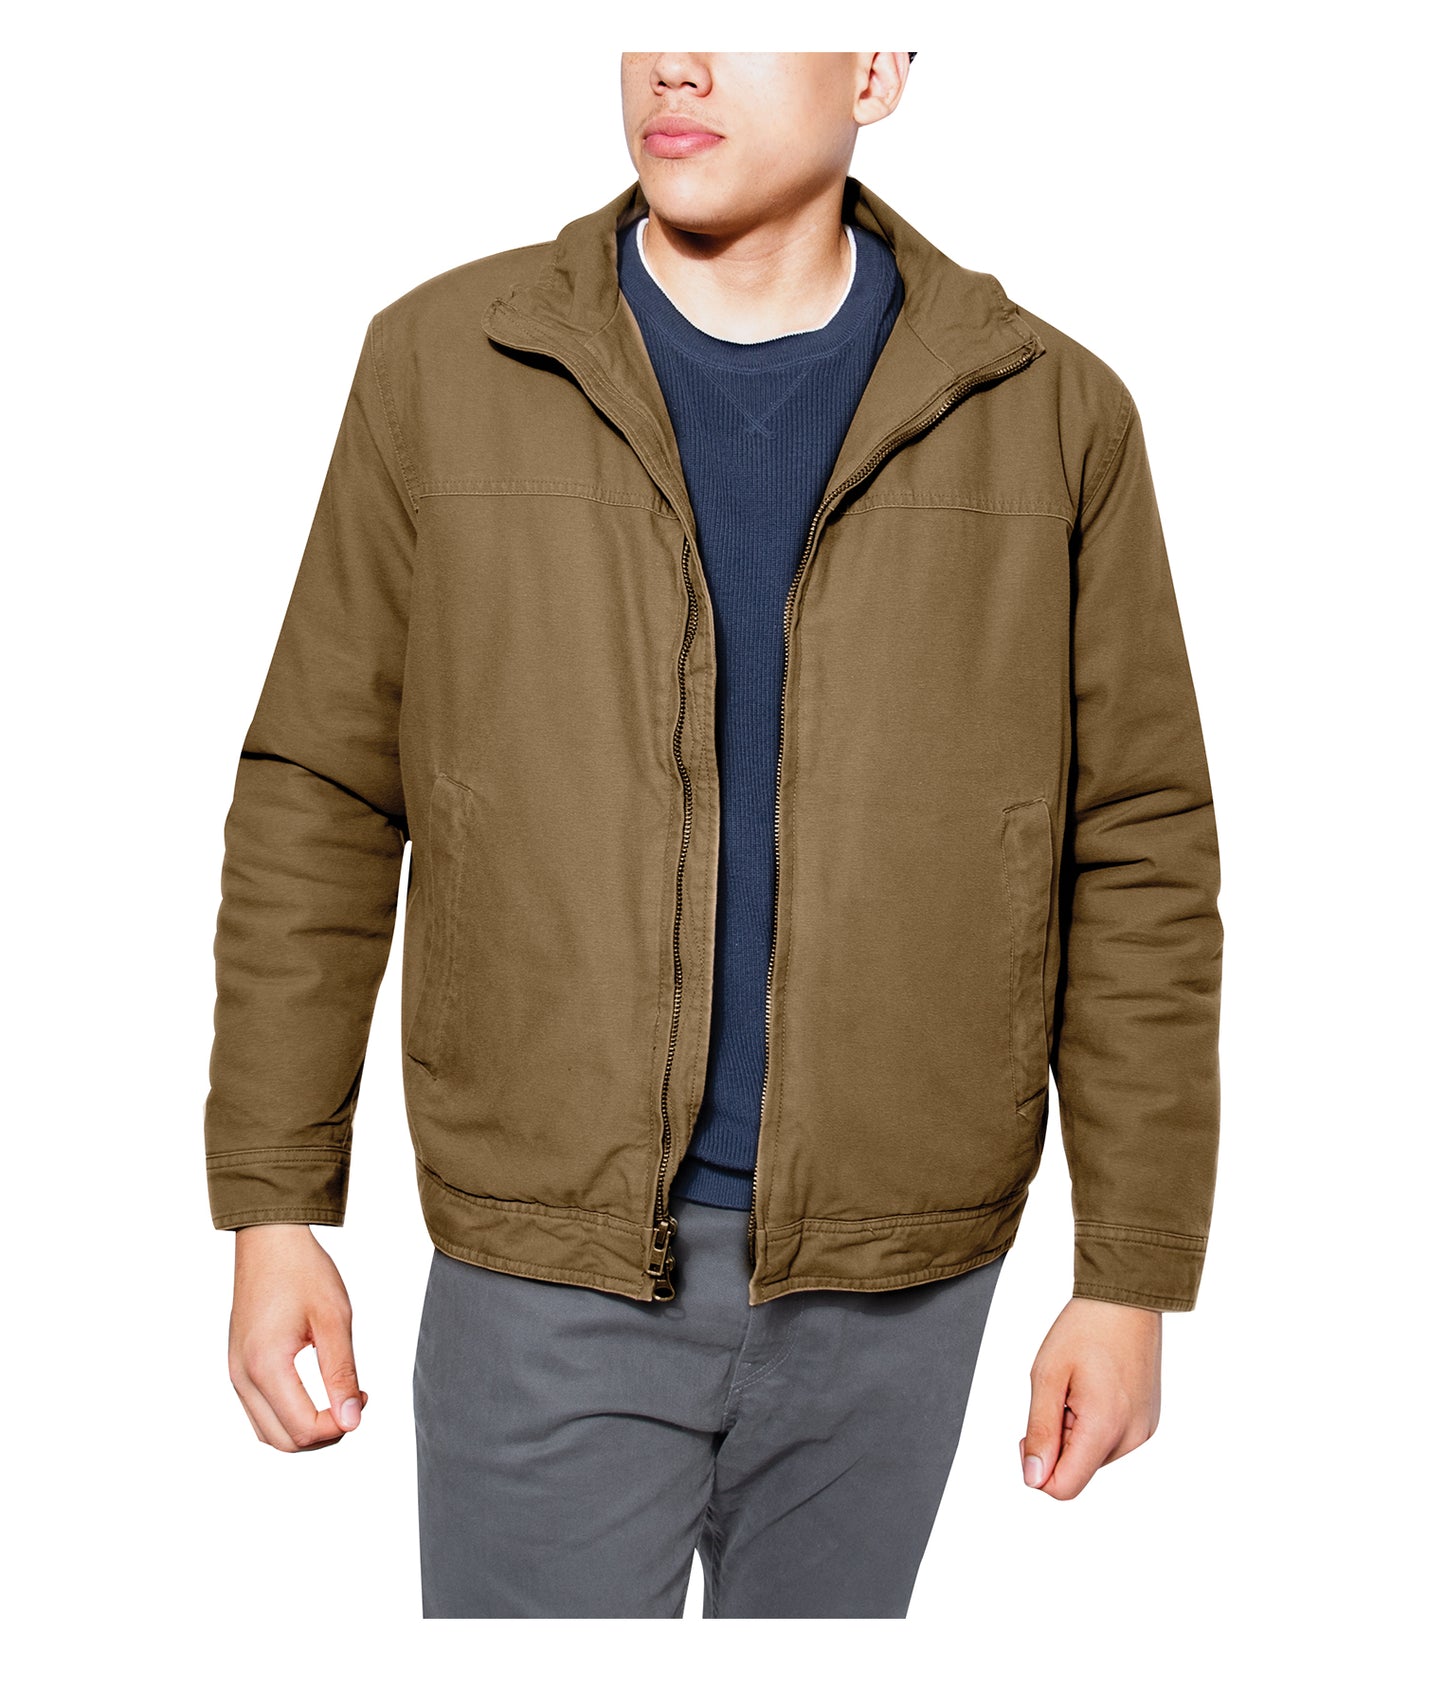 Men's Coyote Brown Concealed Carry 3 Season Jacket by Rothco